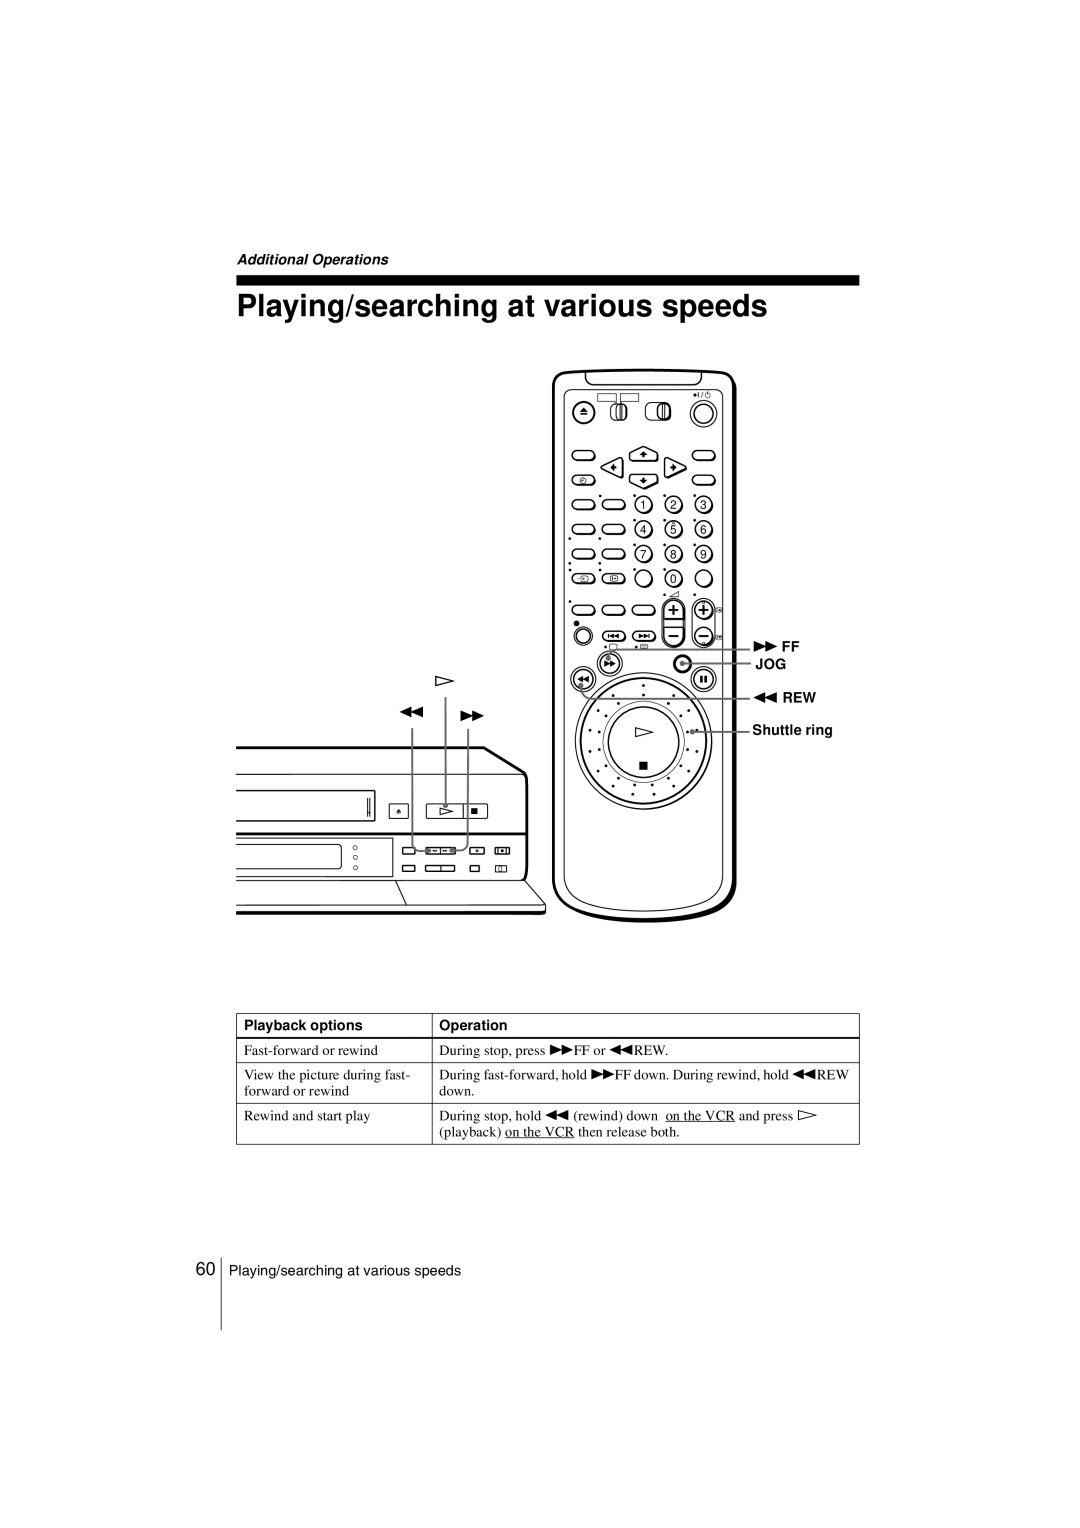 Sony SLV-SF990G manual Playing/searching at various speeds, Additional Operations, M Ff 